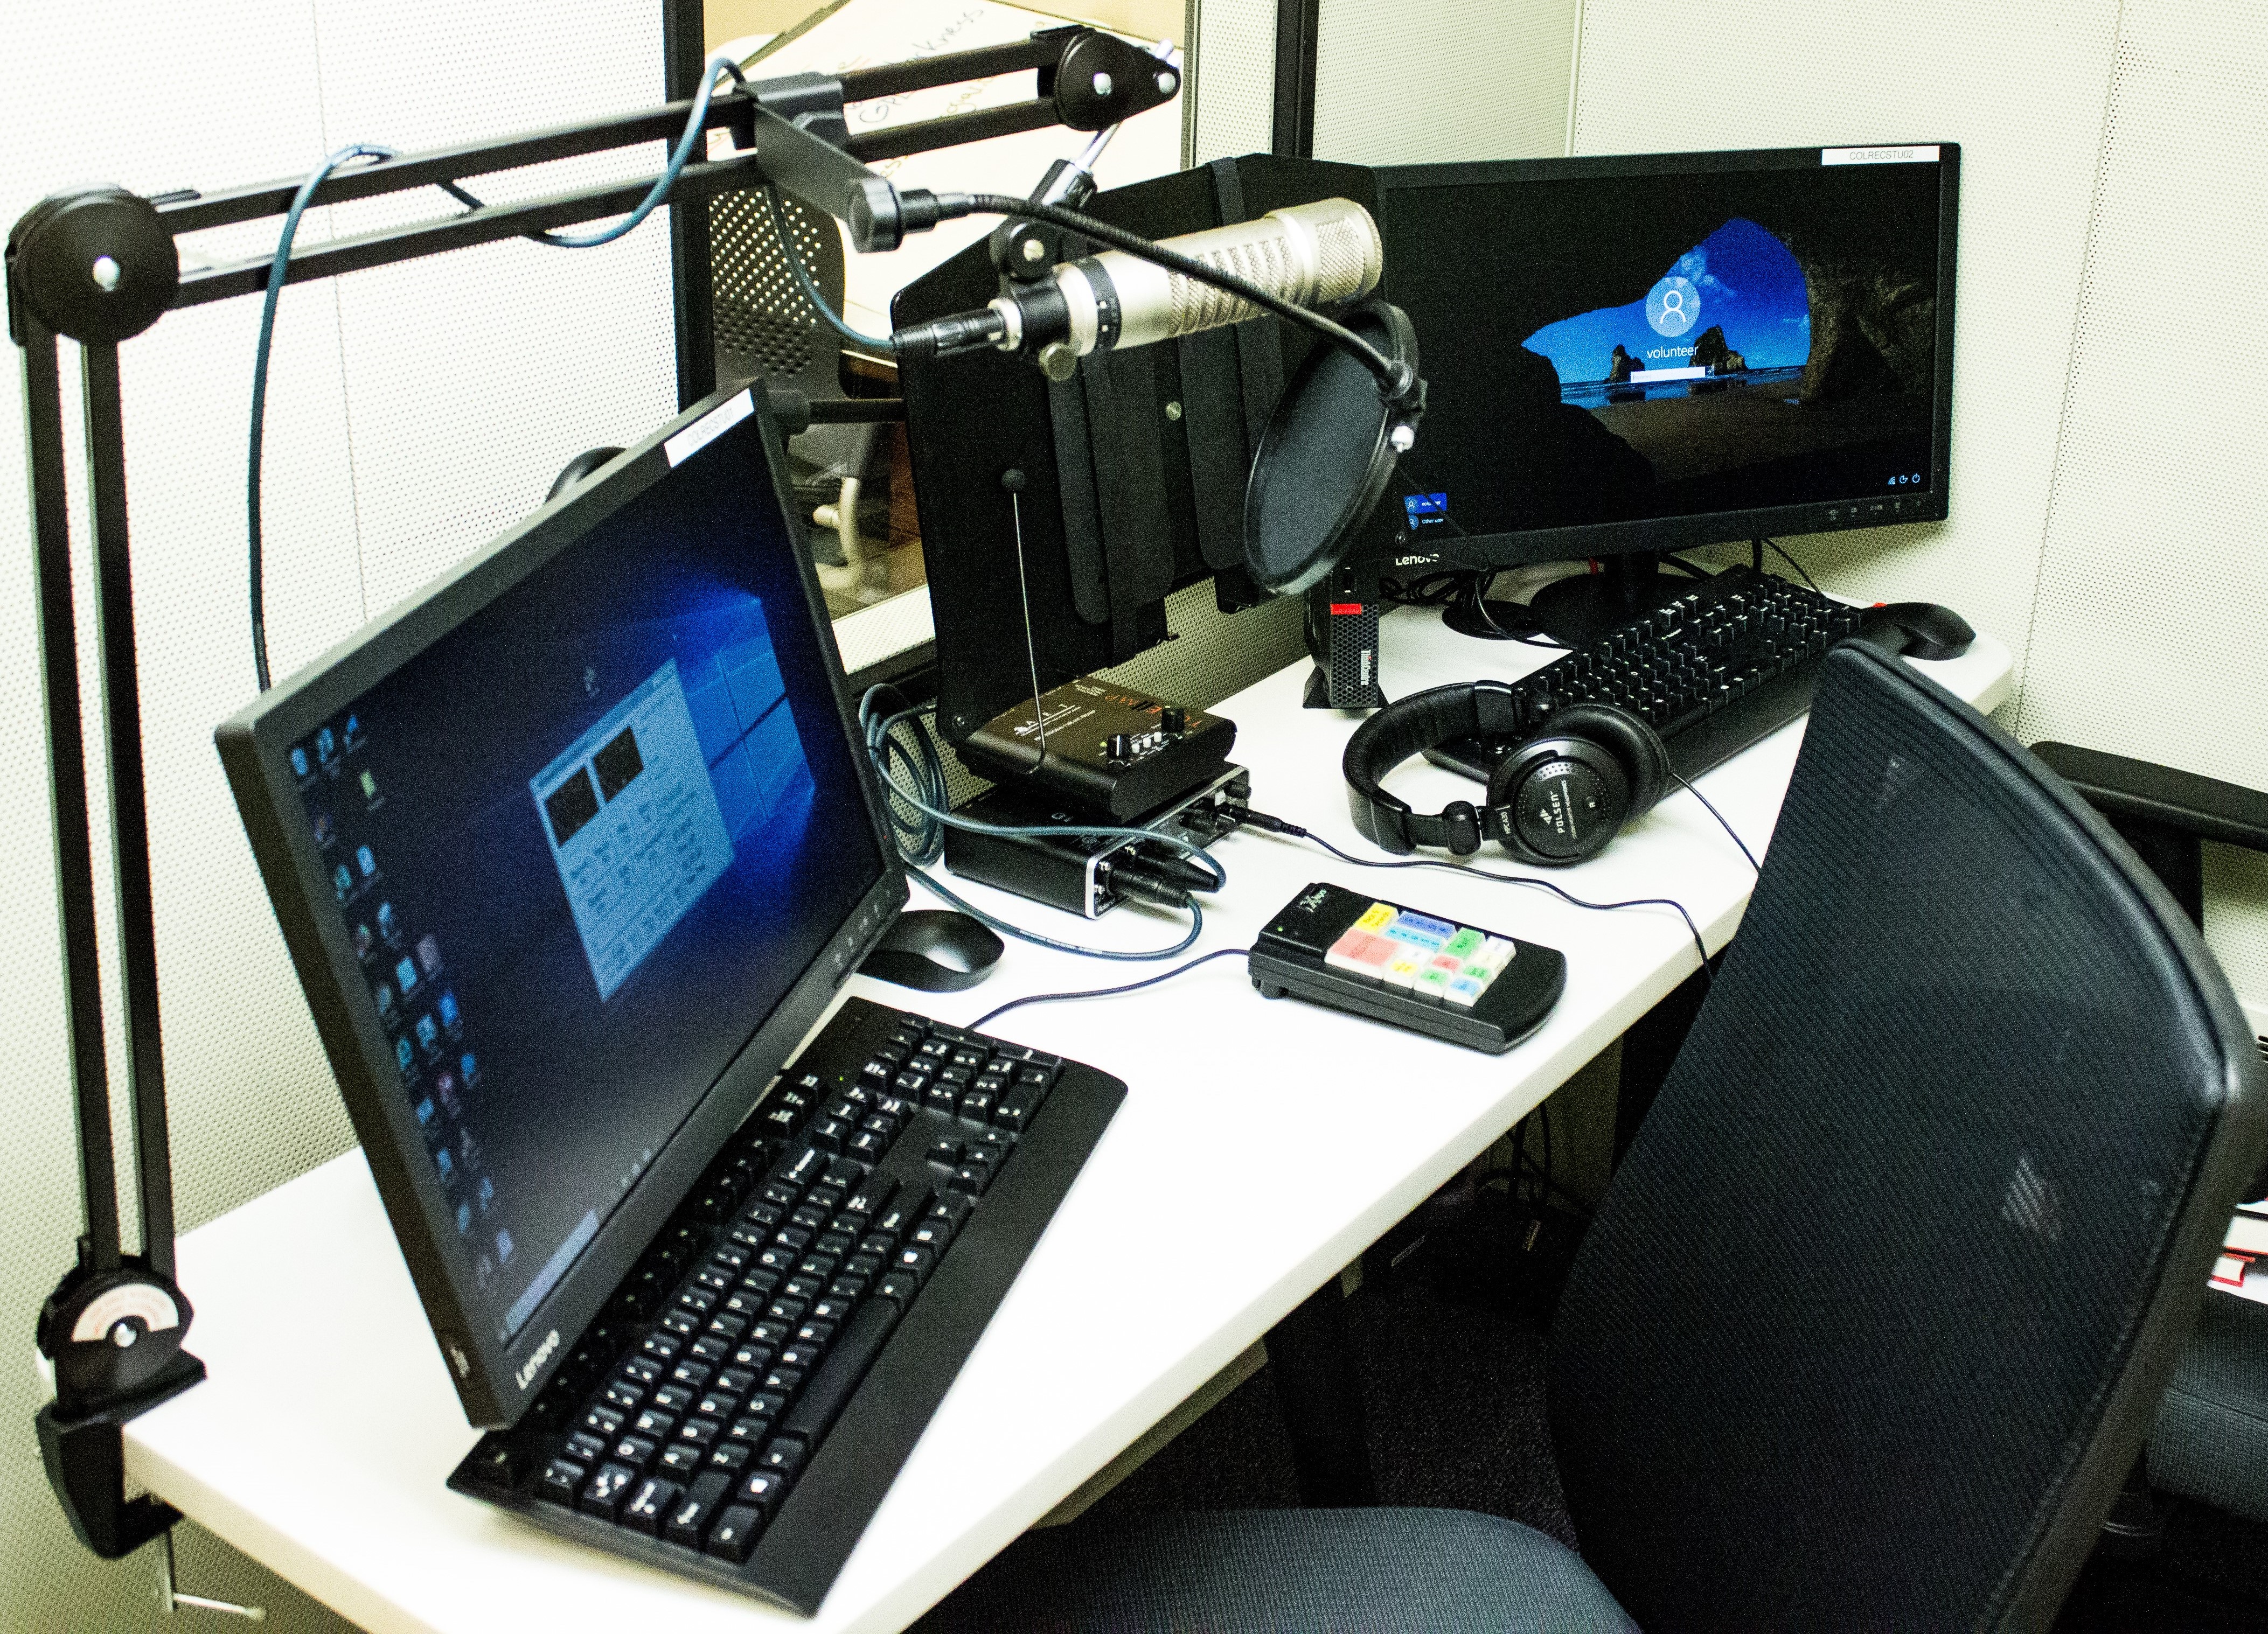 Recording Studio showing the desk with two desktop computers and recording equipment